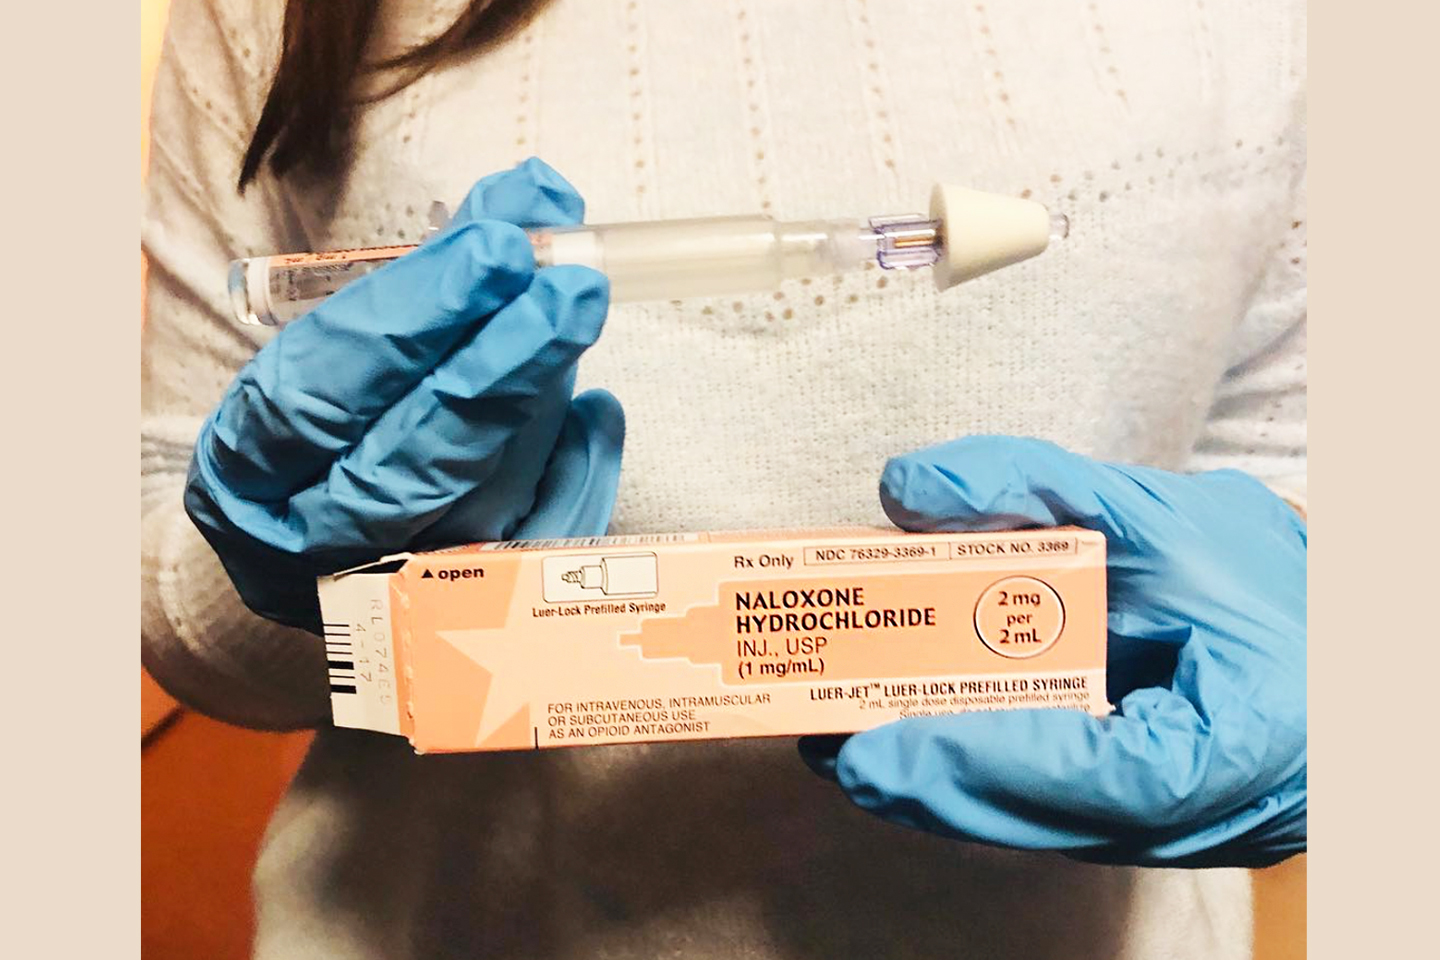 Knowing about naloxone can help save lives.